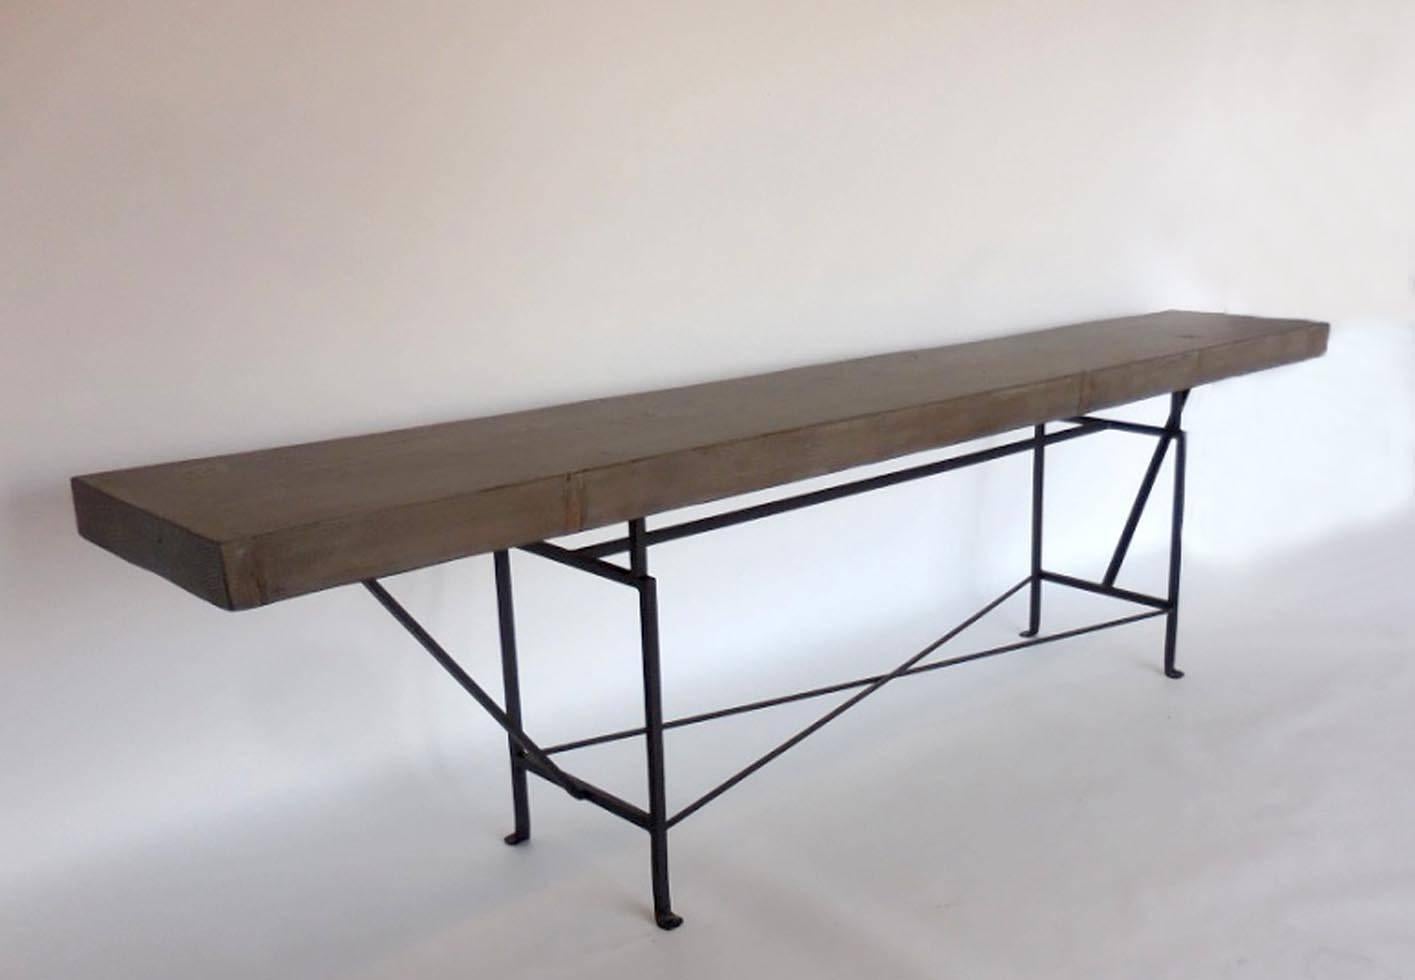 Custom buttress base console. Base is hand-forged iron and top consists of Douglas fir in a custom grey/beige finish. Can be made in any size and in a variety of custom colors/finishes. Dos Gallos Studio.  Made in Los Angeles.
PRICES ARE SUBJECT TO